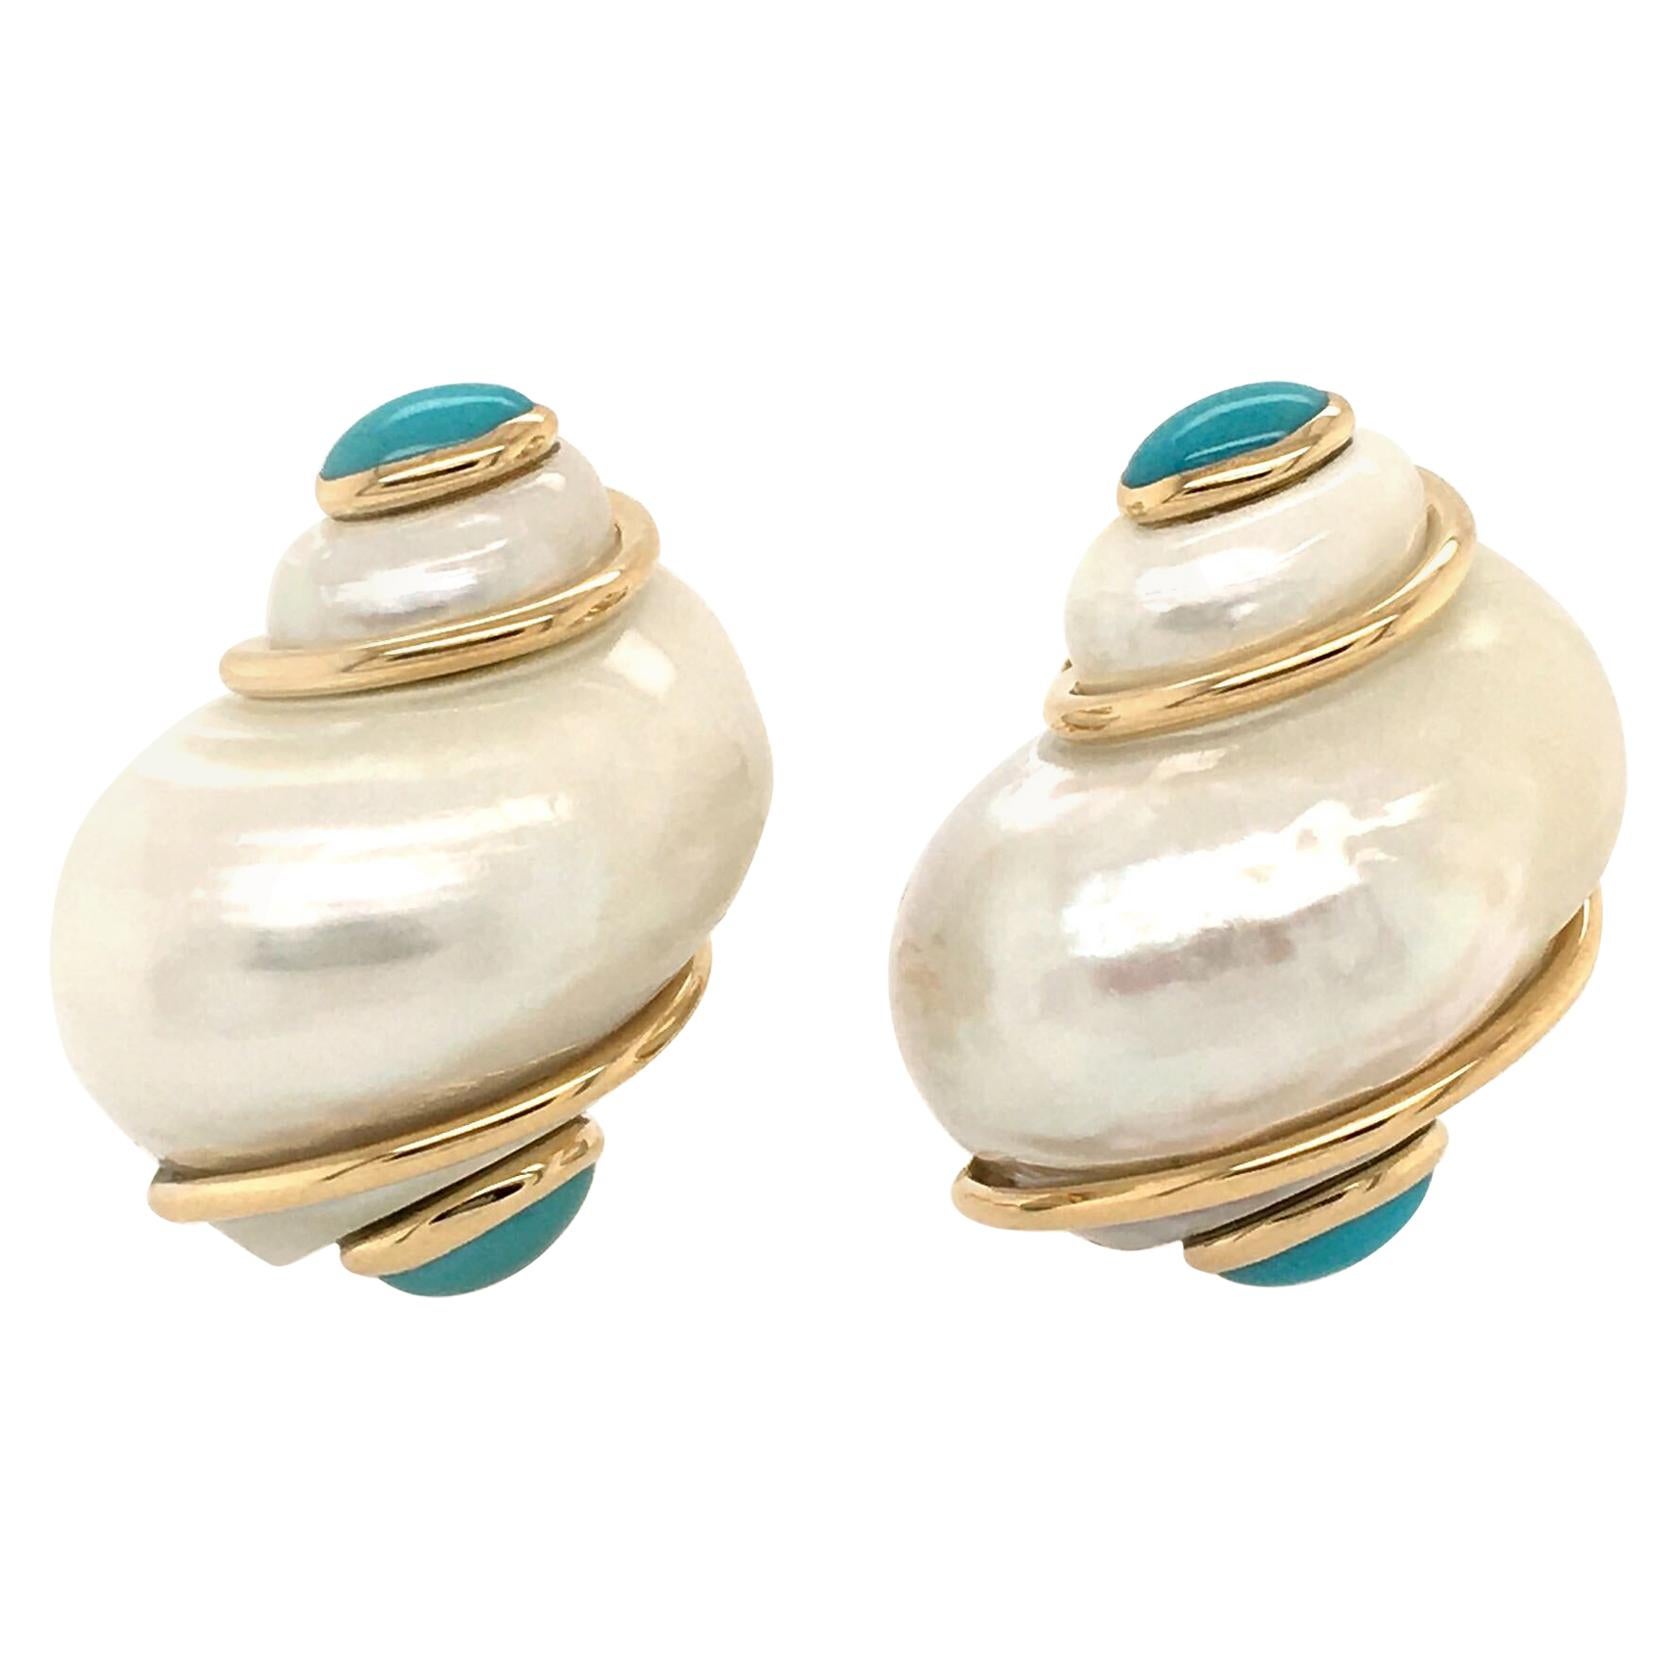 Seaman Schepps Turbo Shell and Turquoise Earrings